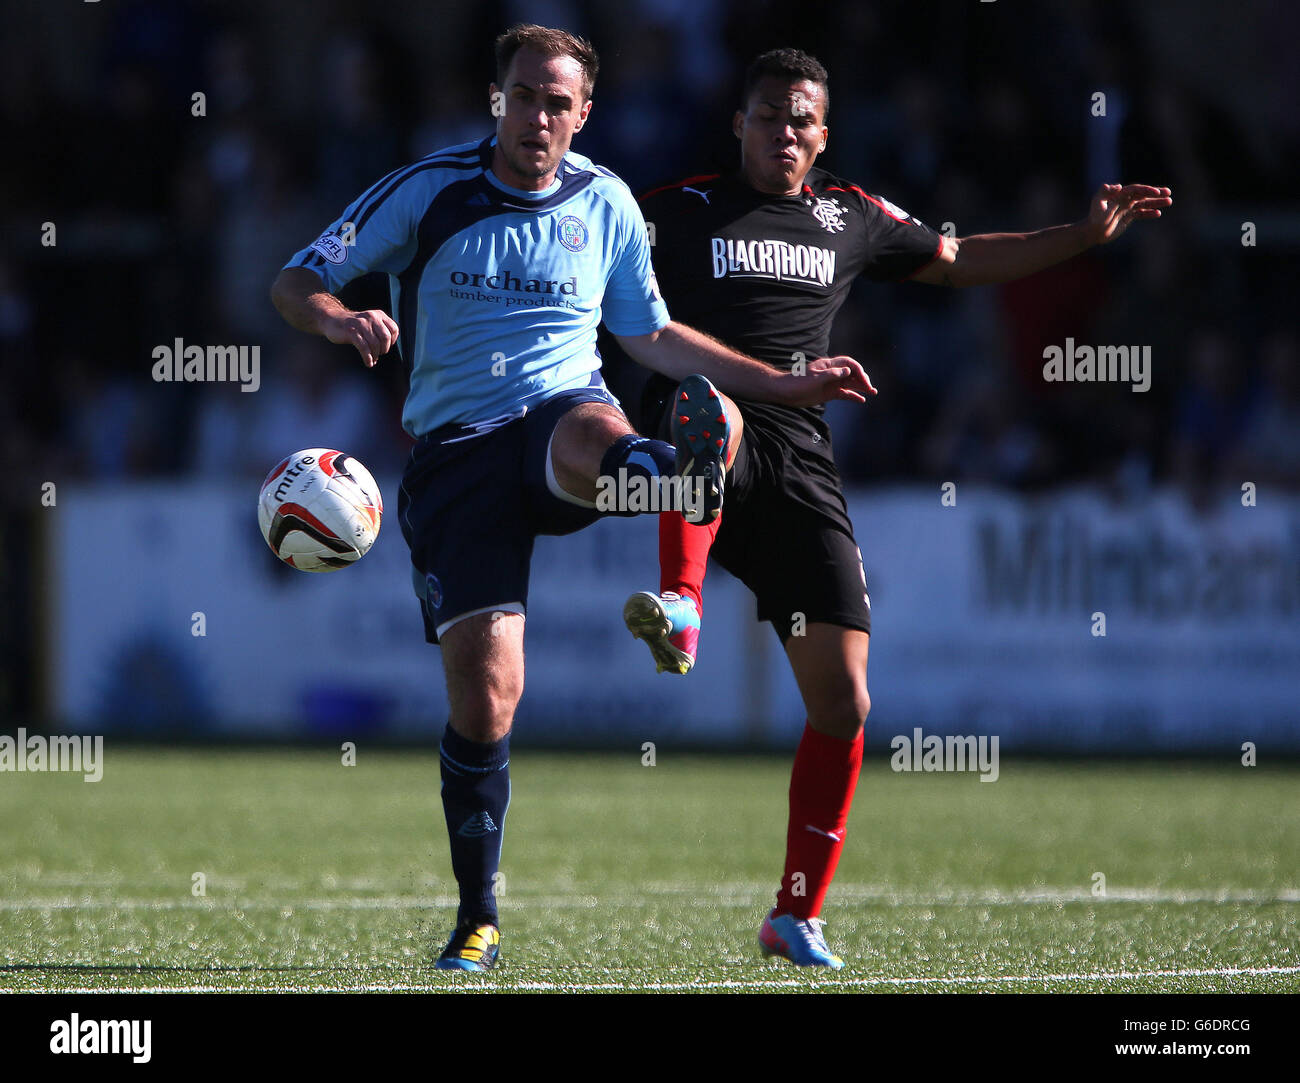 Soccer - Scottish League One - Forfar Athletic v Rangers - Station Park. Forfar's Iain Campbell (left) challenges Rangers Arnold Peralta during the Scottish League One match at Station Park, Forfar. Stock Photo